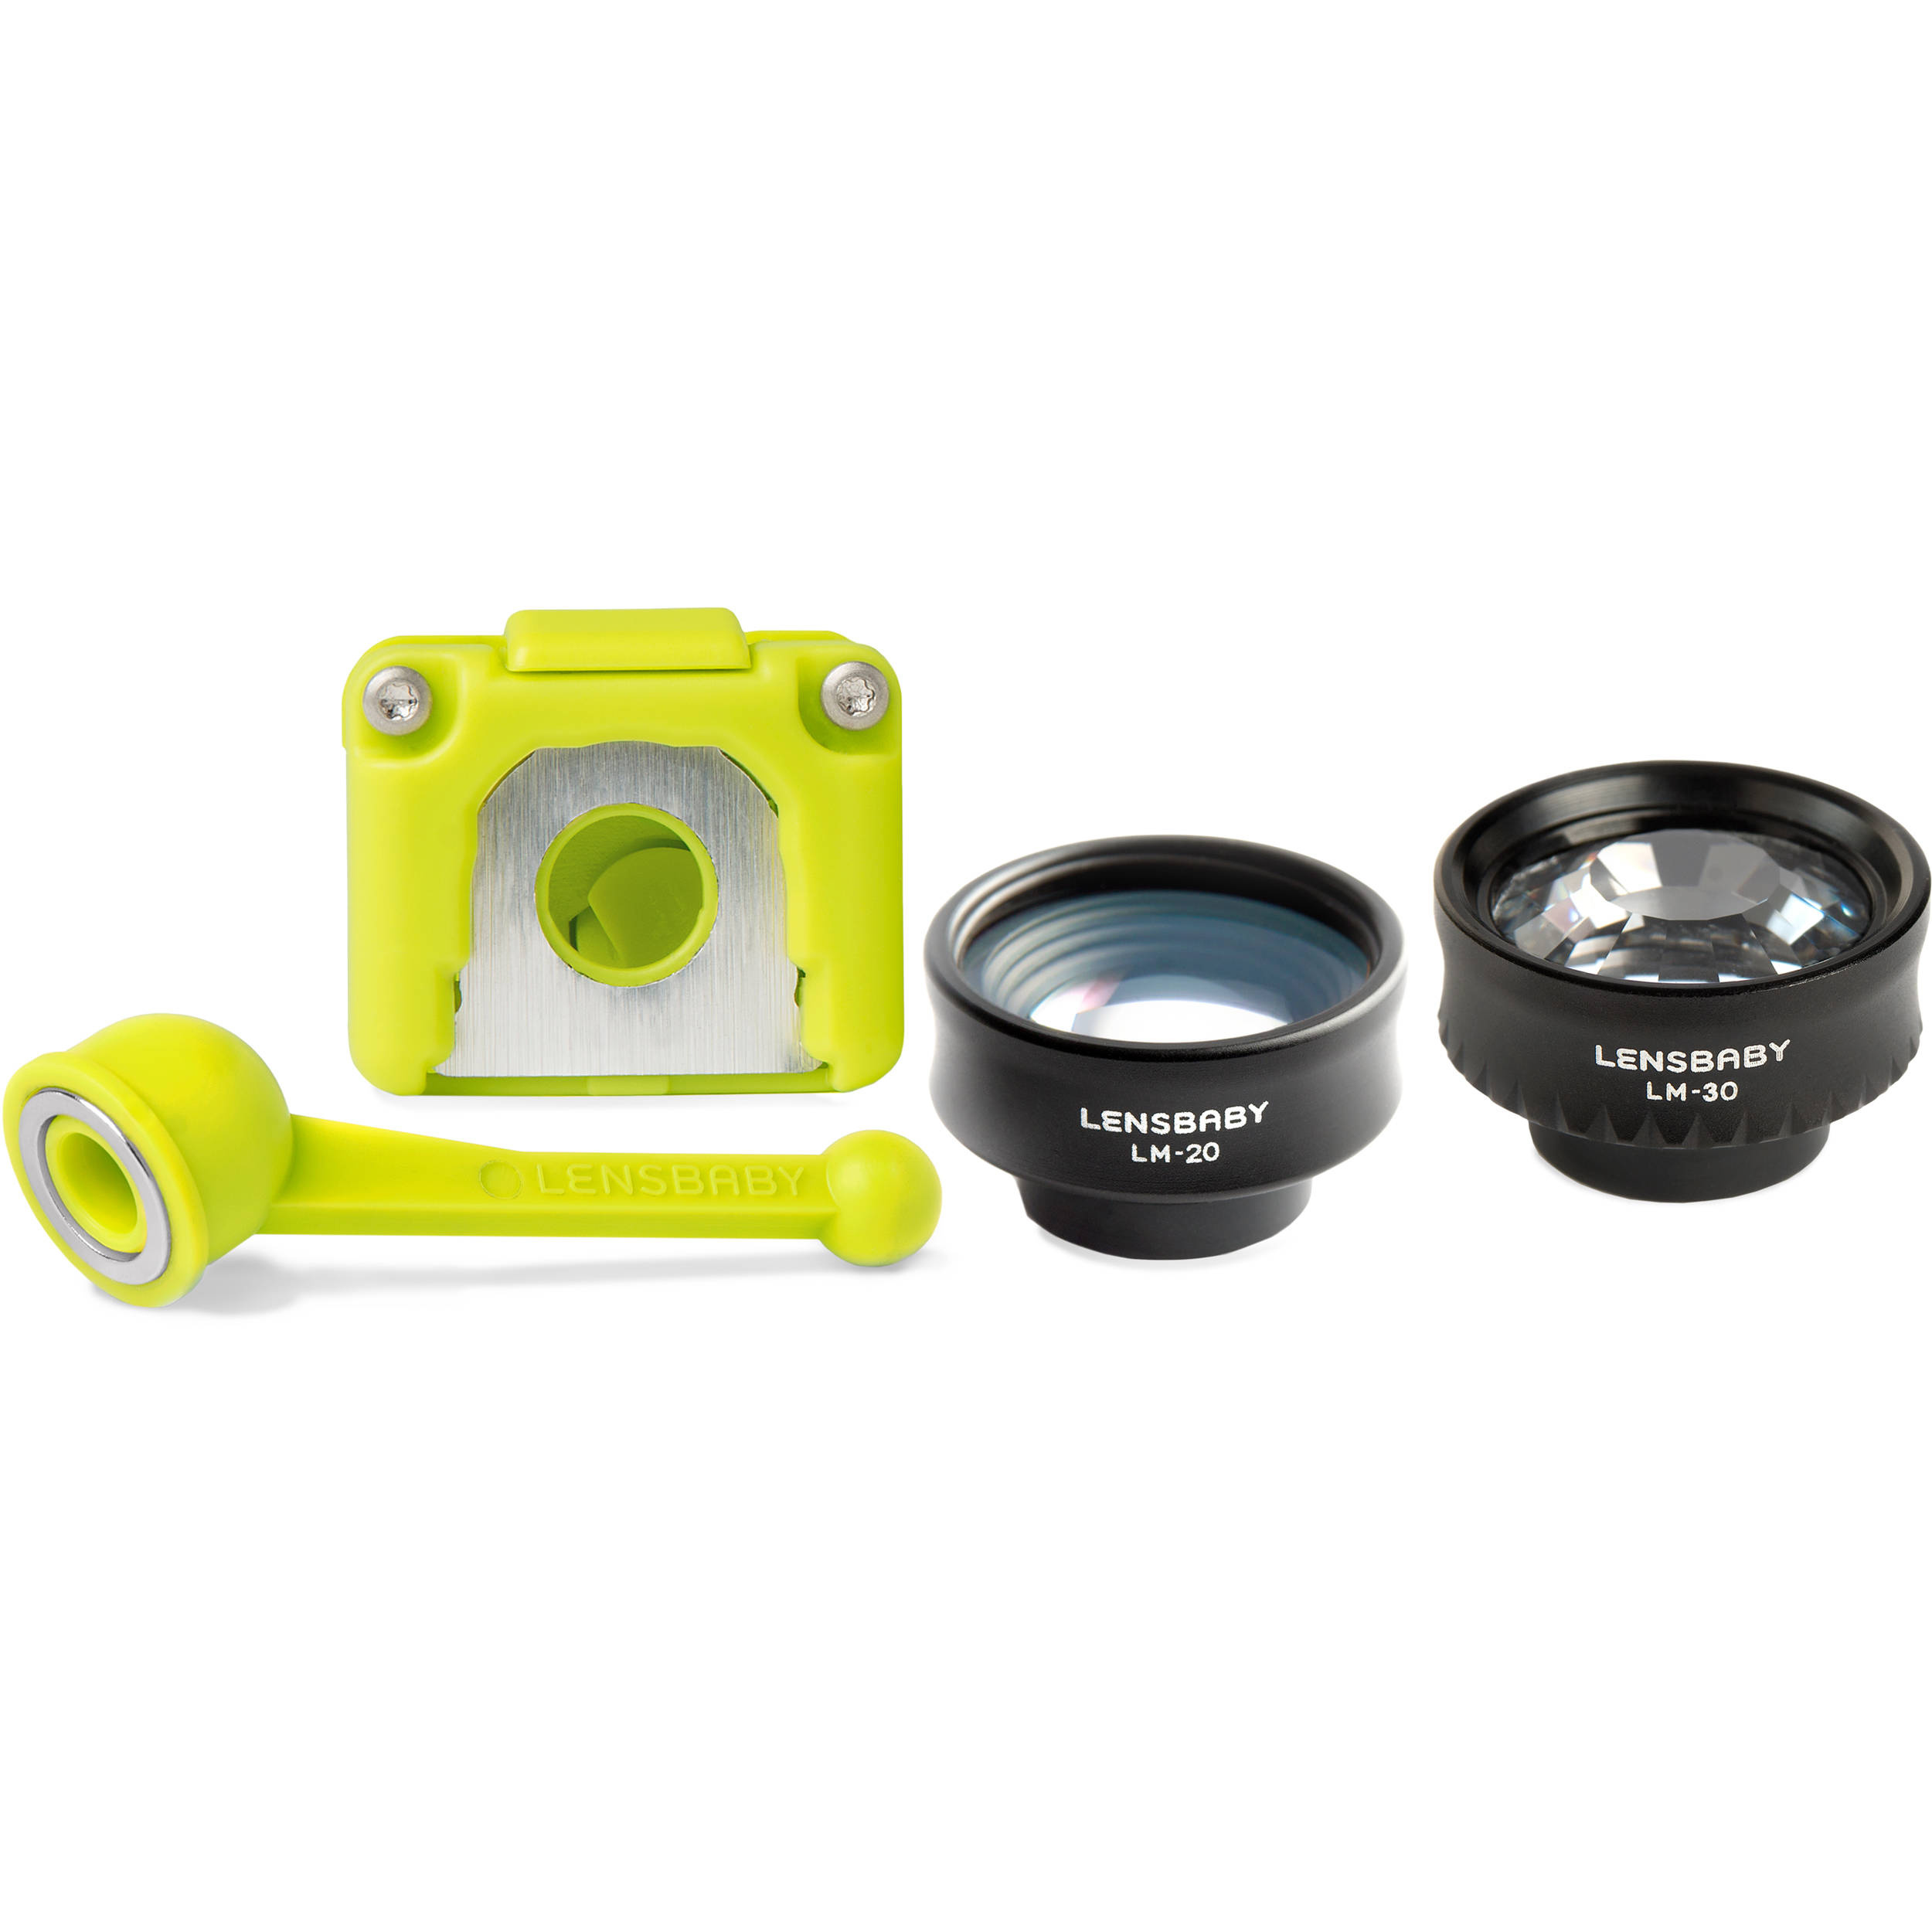 Lensbaby Creative Mobile Kit for iPhone 6 Plus